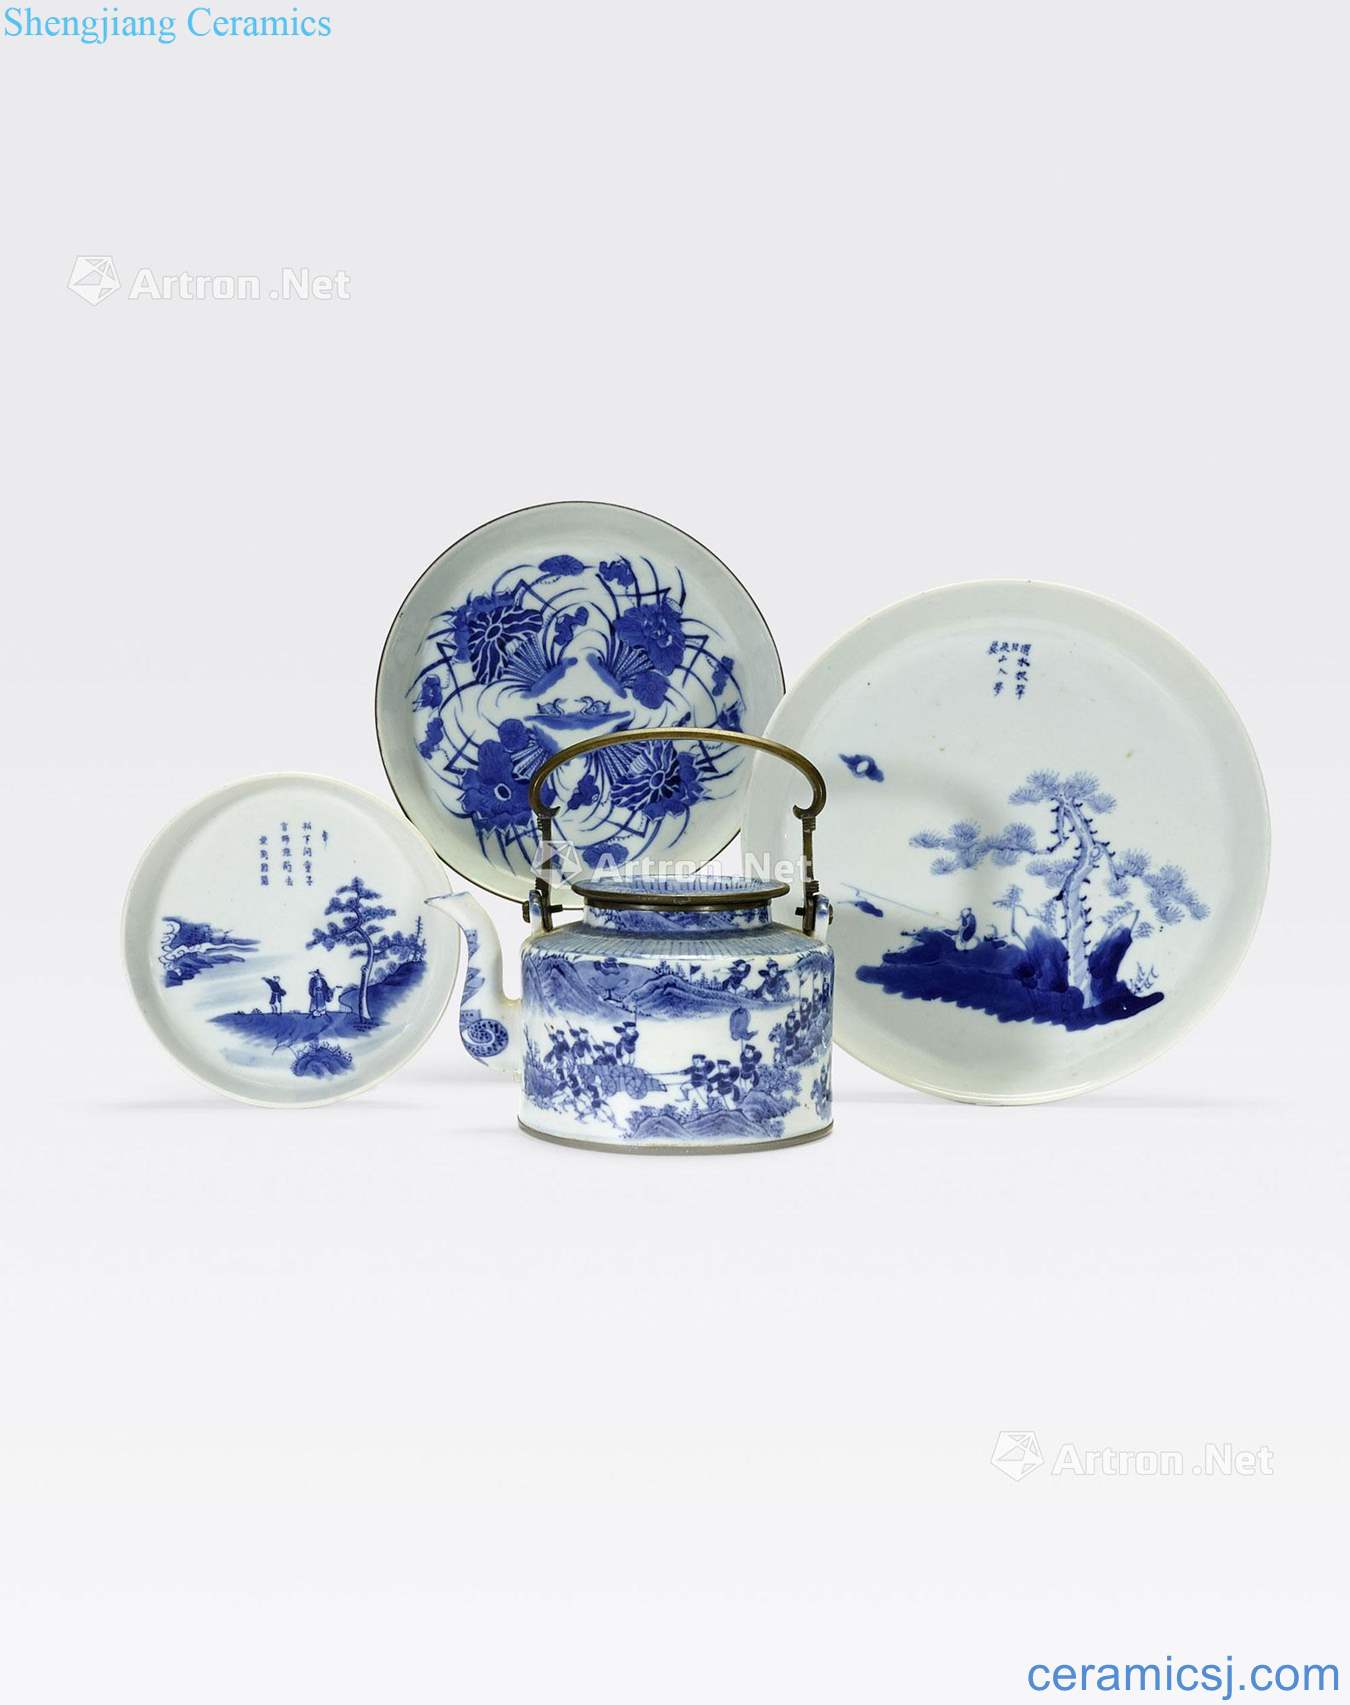 THE 19 th century and later A GROUP OF BLUE and WHITE PORCELAINS MADE FOR THE VIETNAMESE MARKET